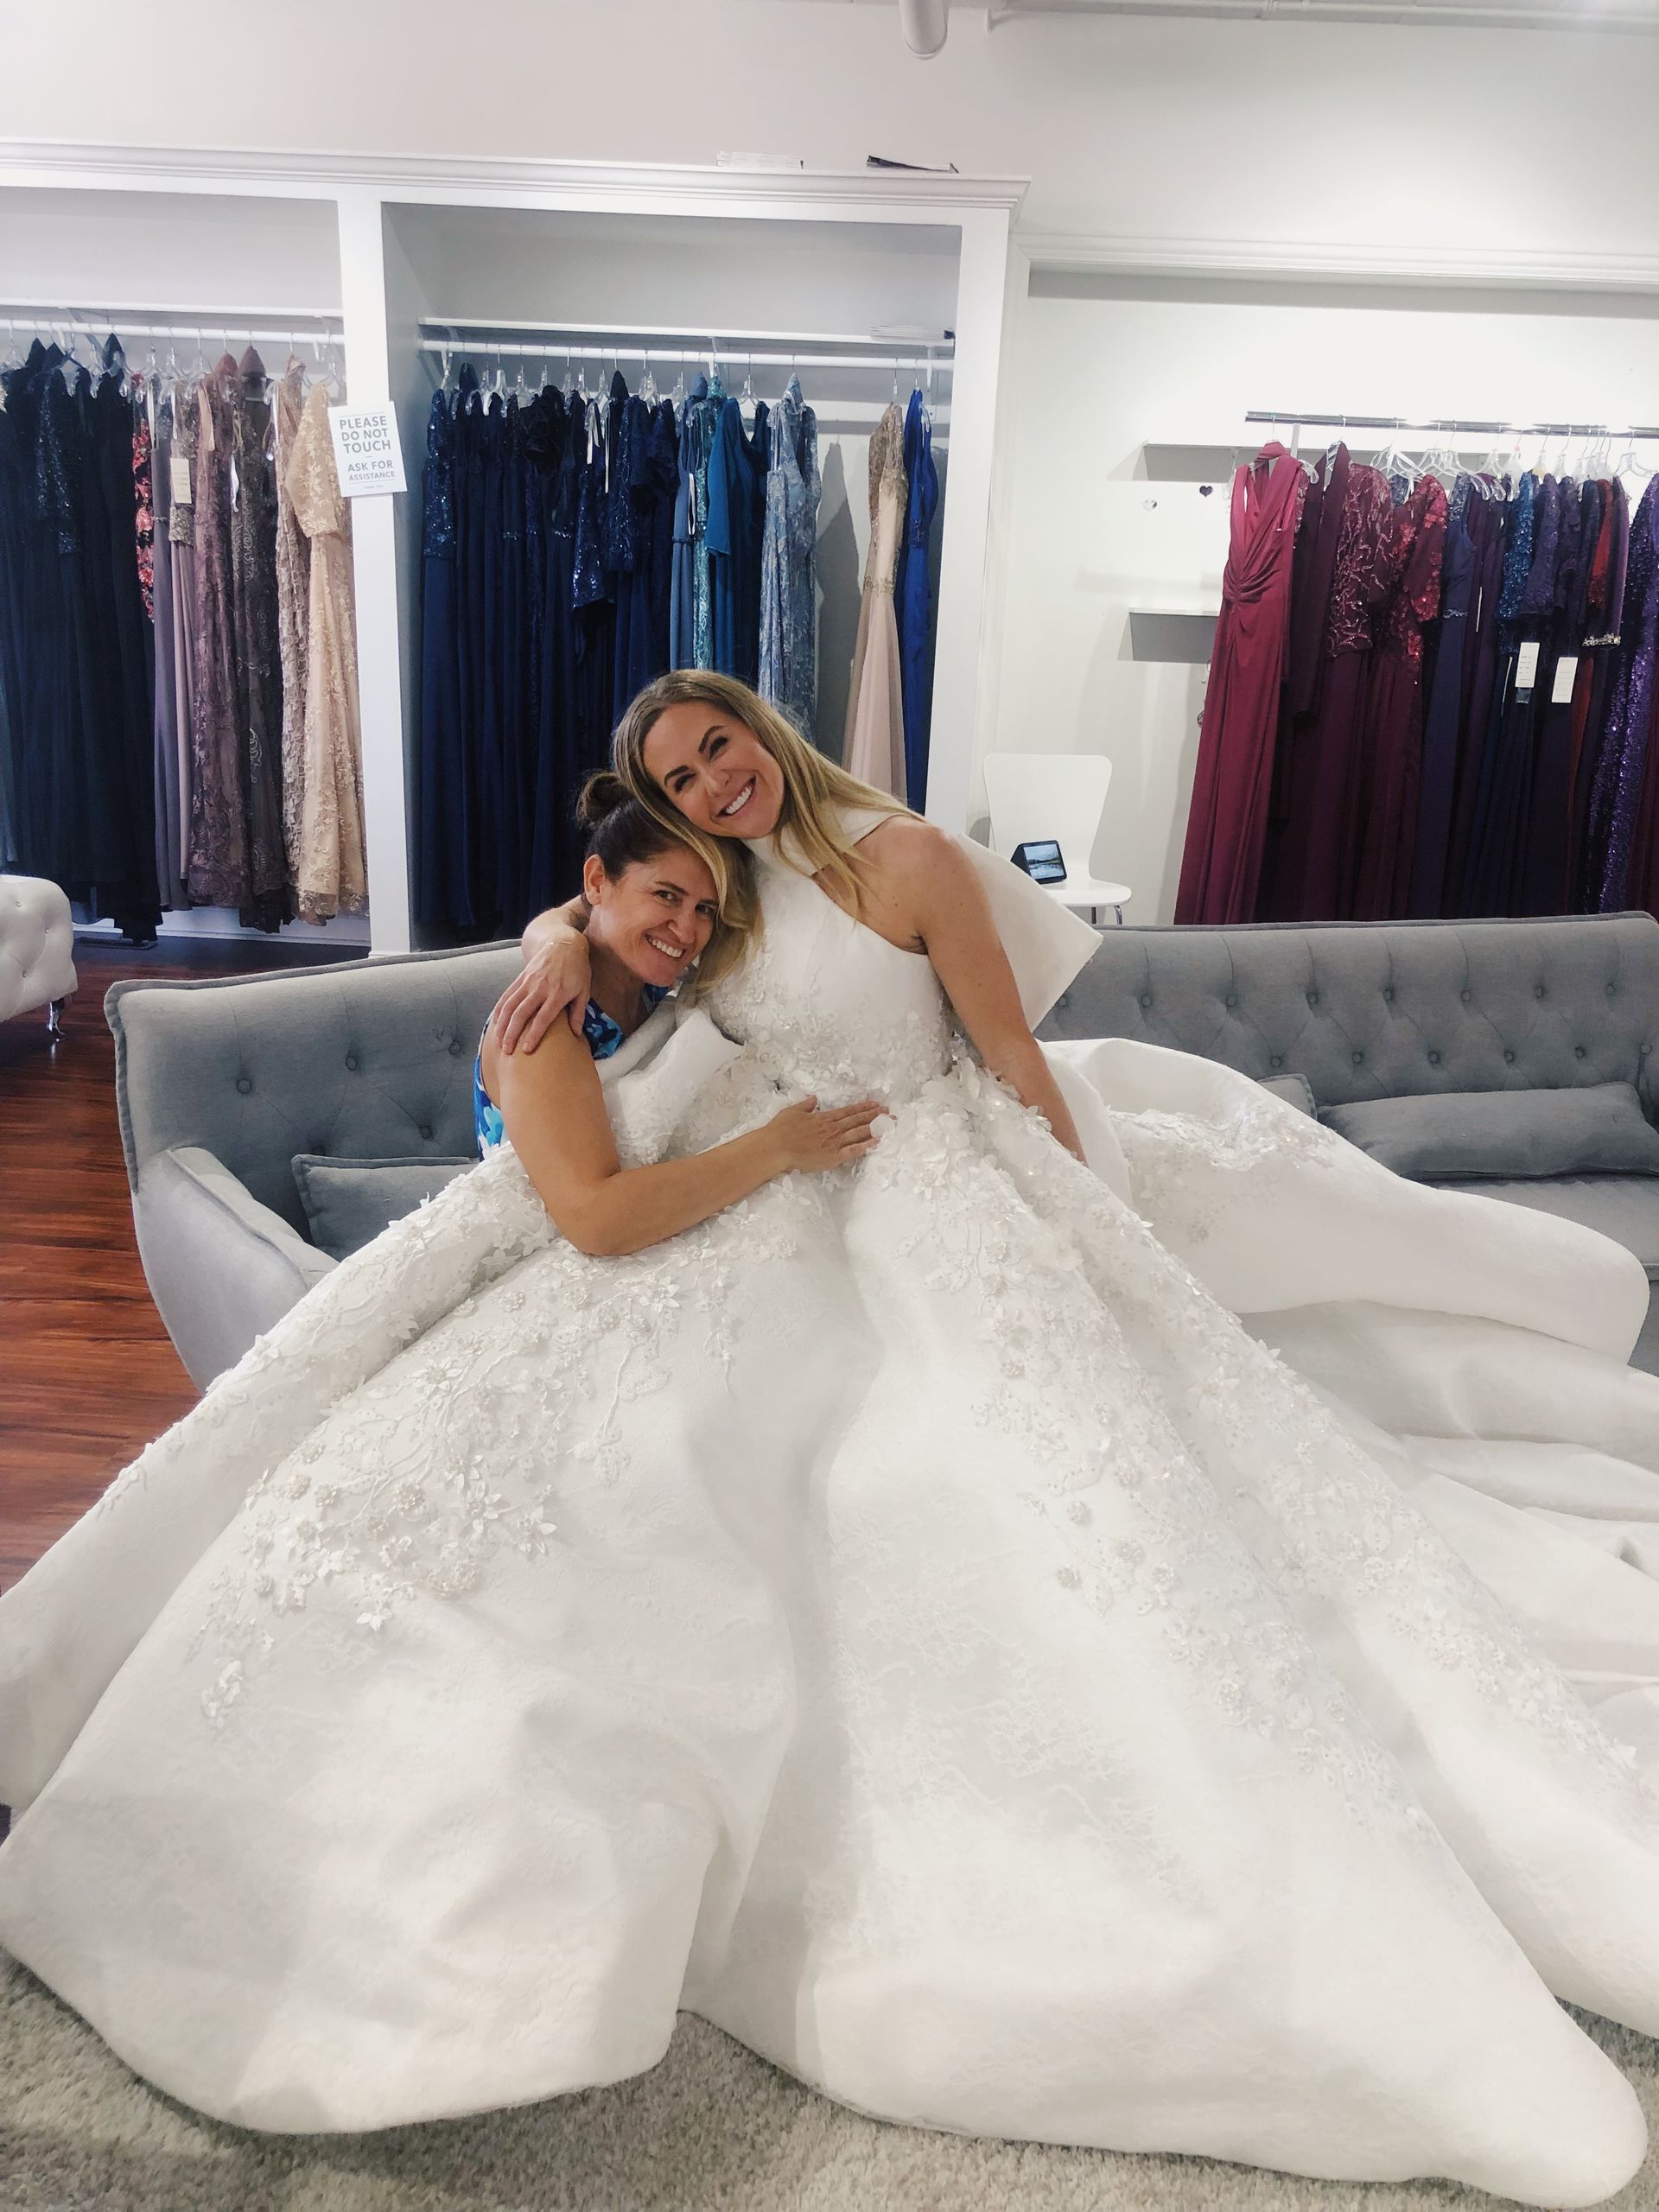 Two women in wedding dresses are posing for a picture